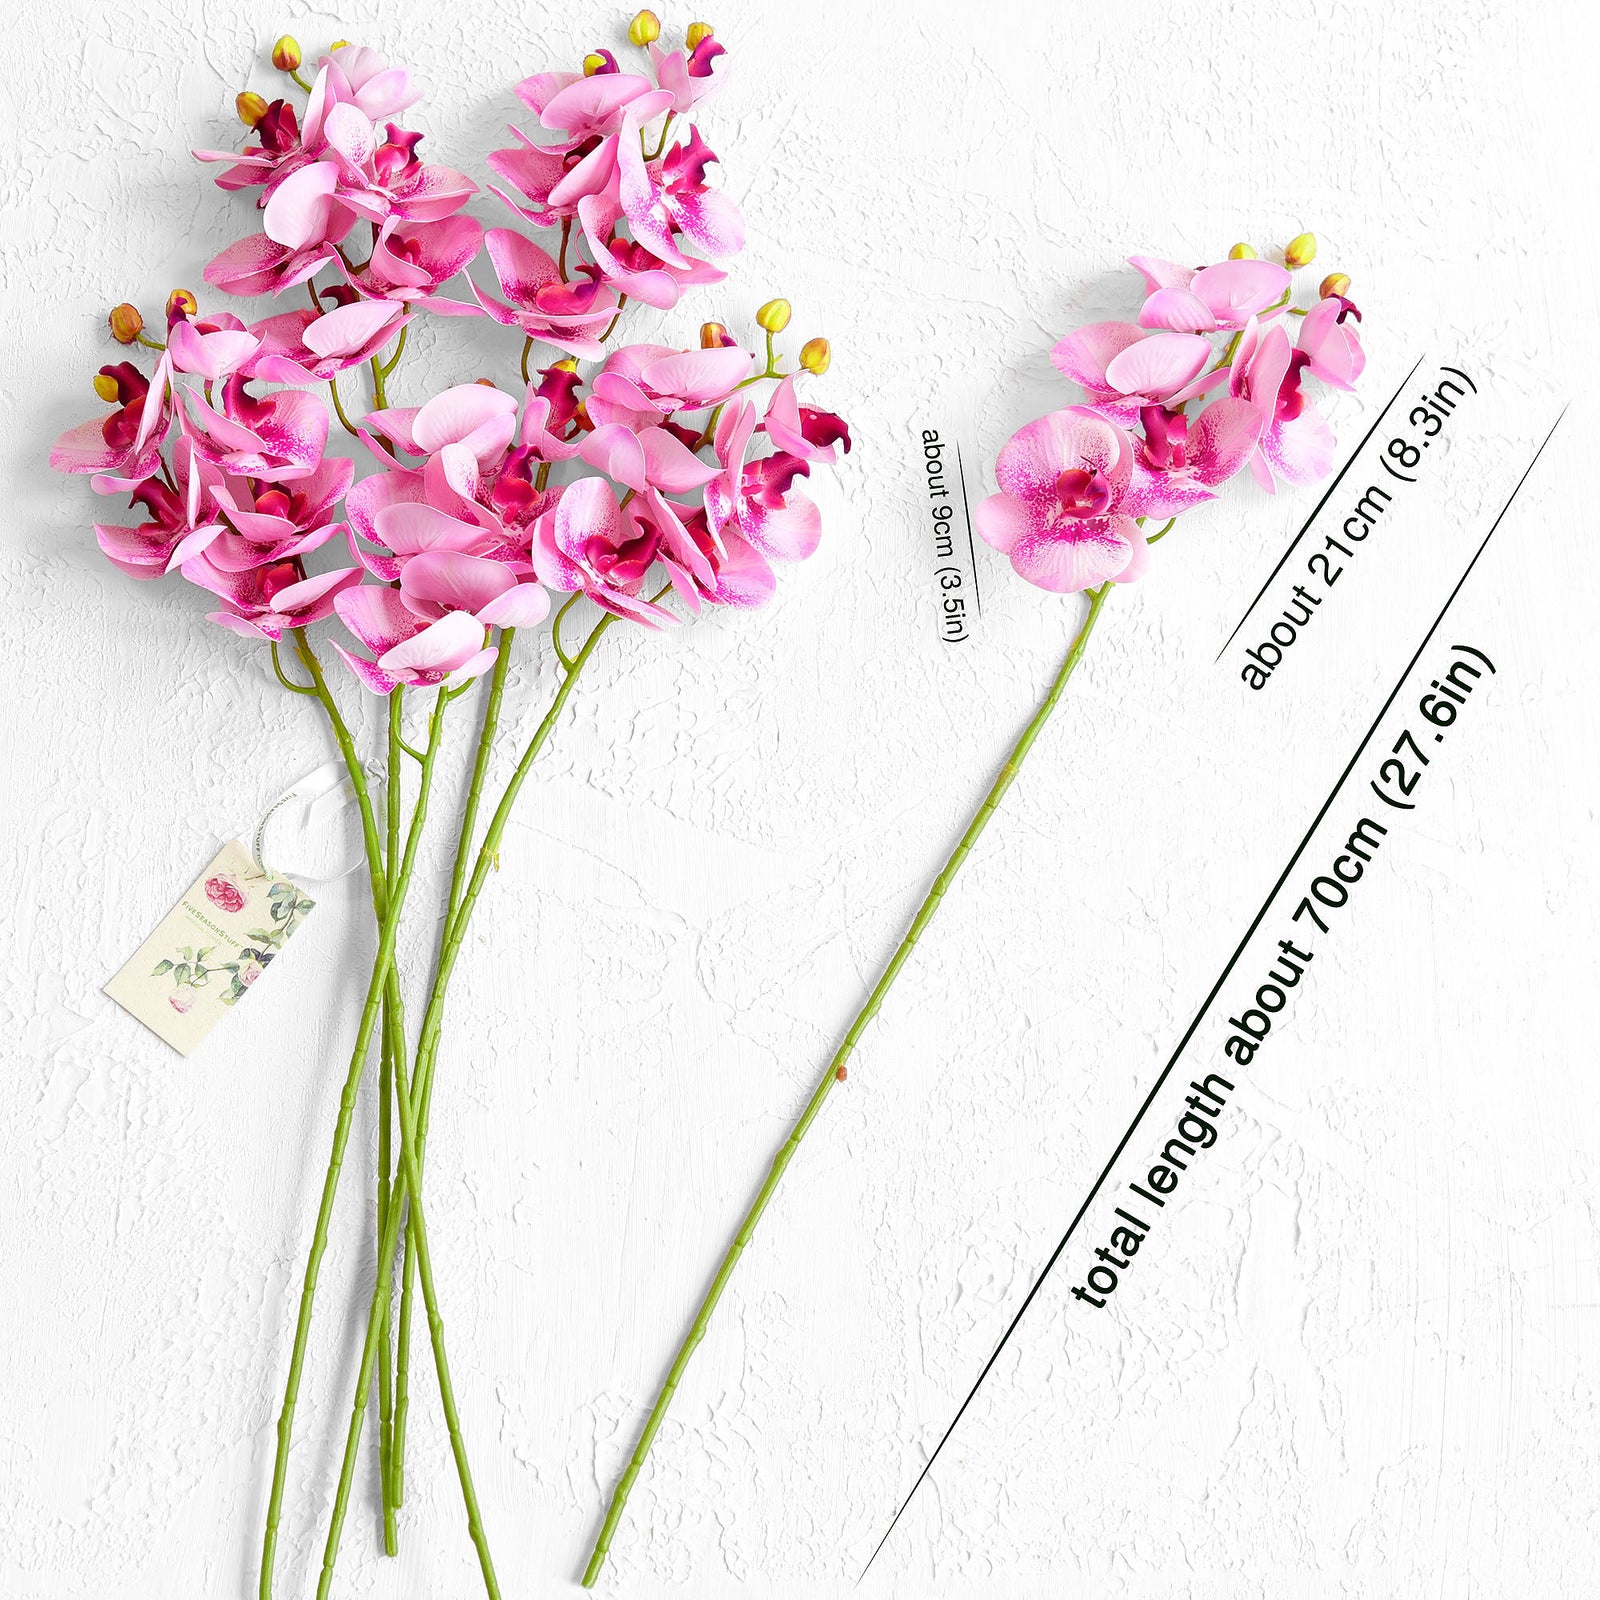 Pastel Violet 2 Stems Real Touch Artificial Butterfly Orchids/Moth Orchid/Phalaenopsis Flowers 27.6" Tall 70cm